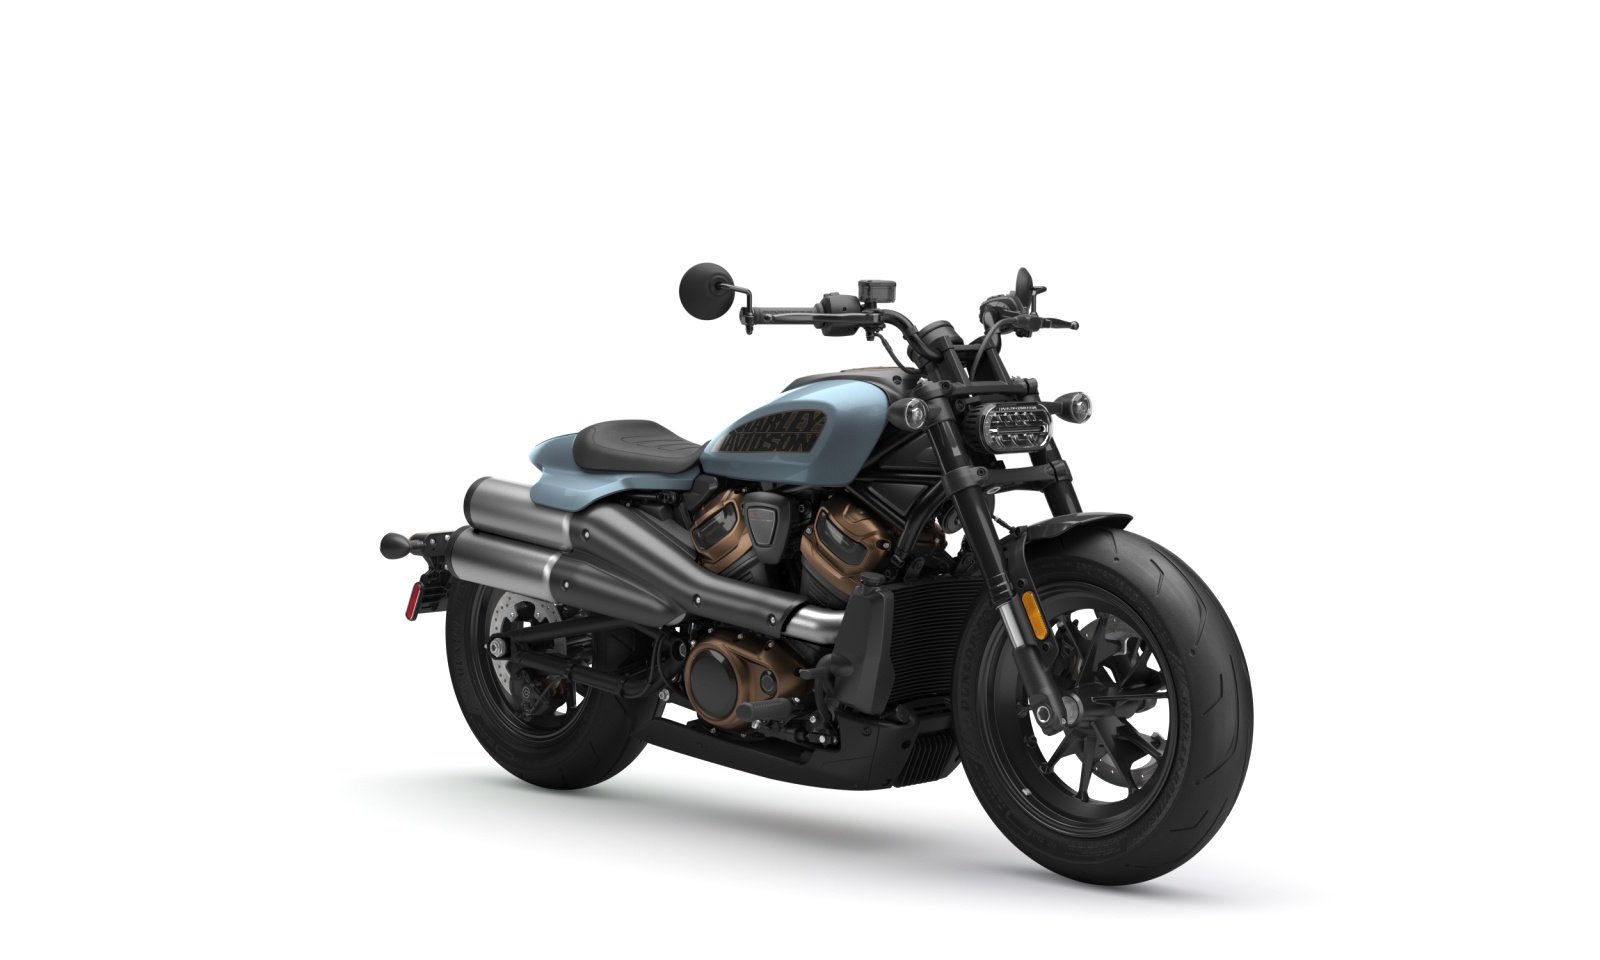 2021 Harley-Davidson Sportster S First Look - Cycle News